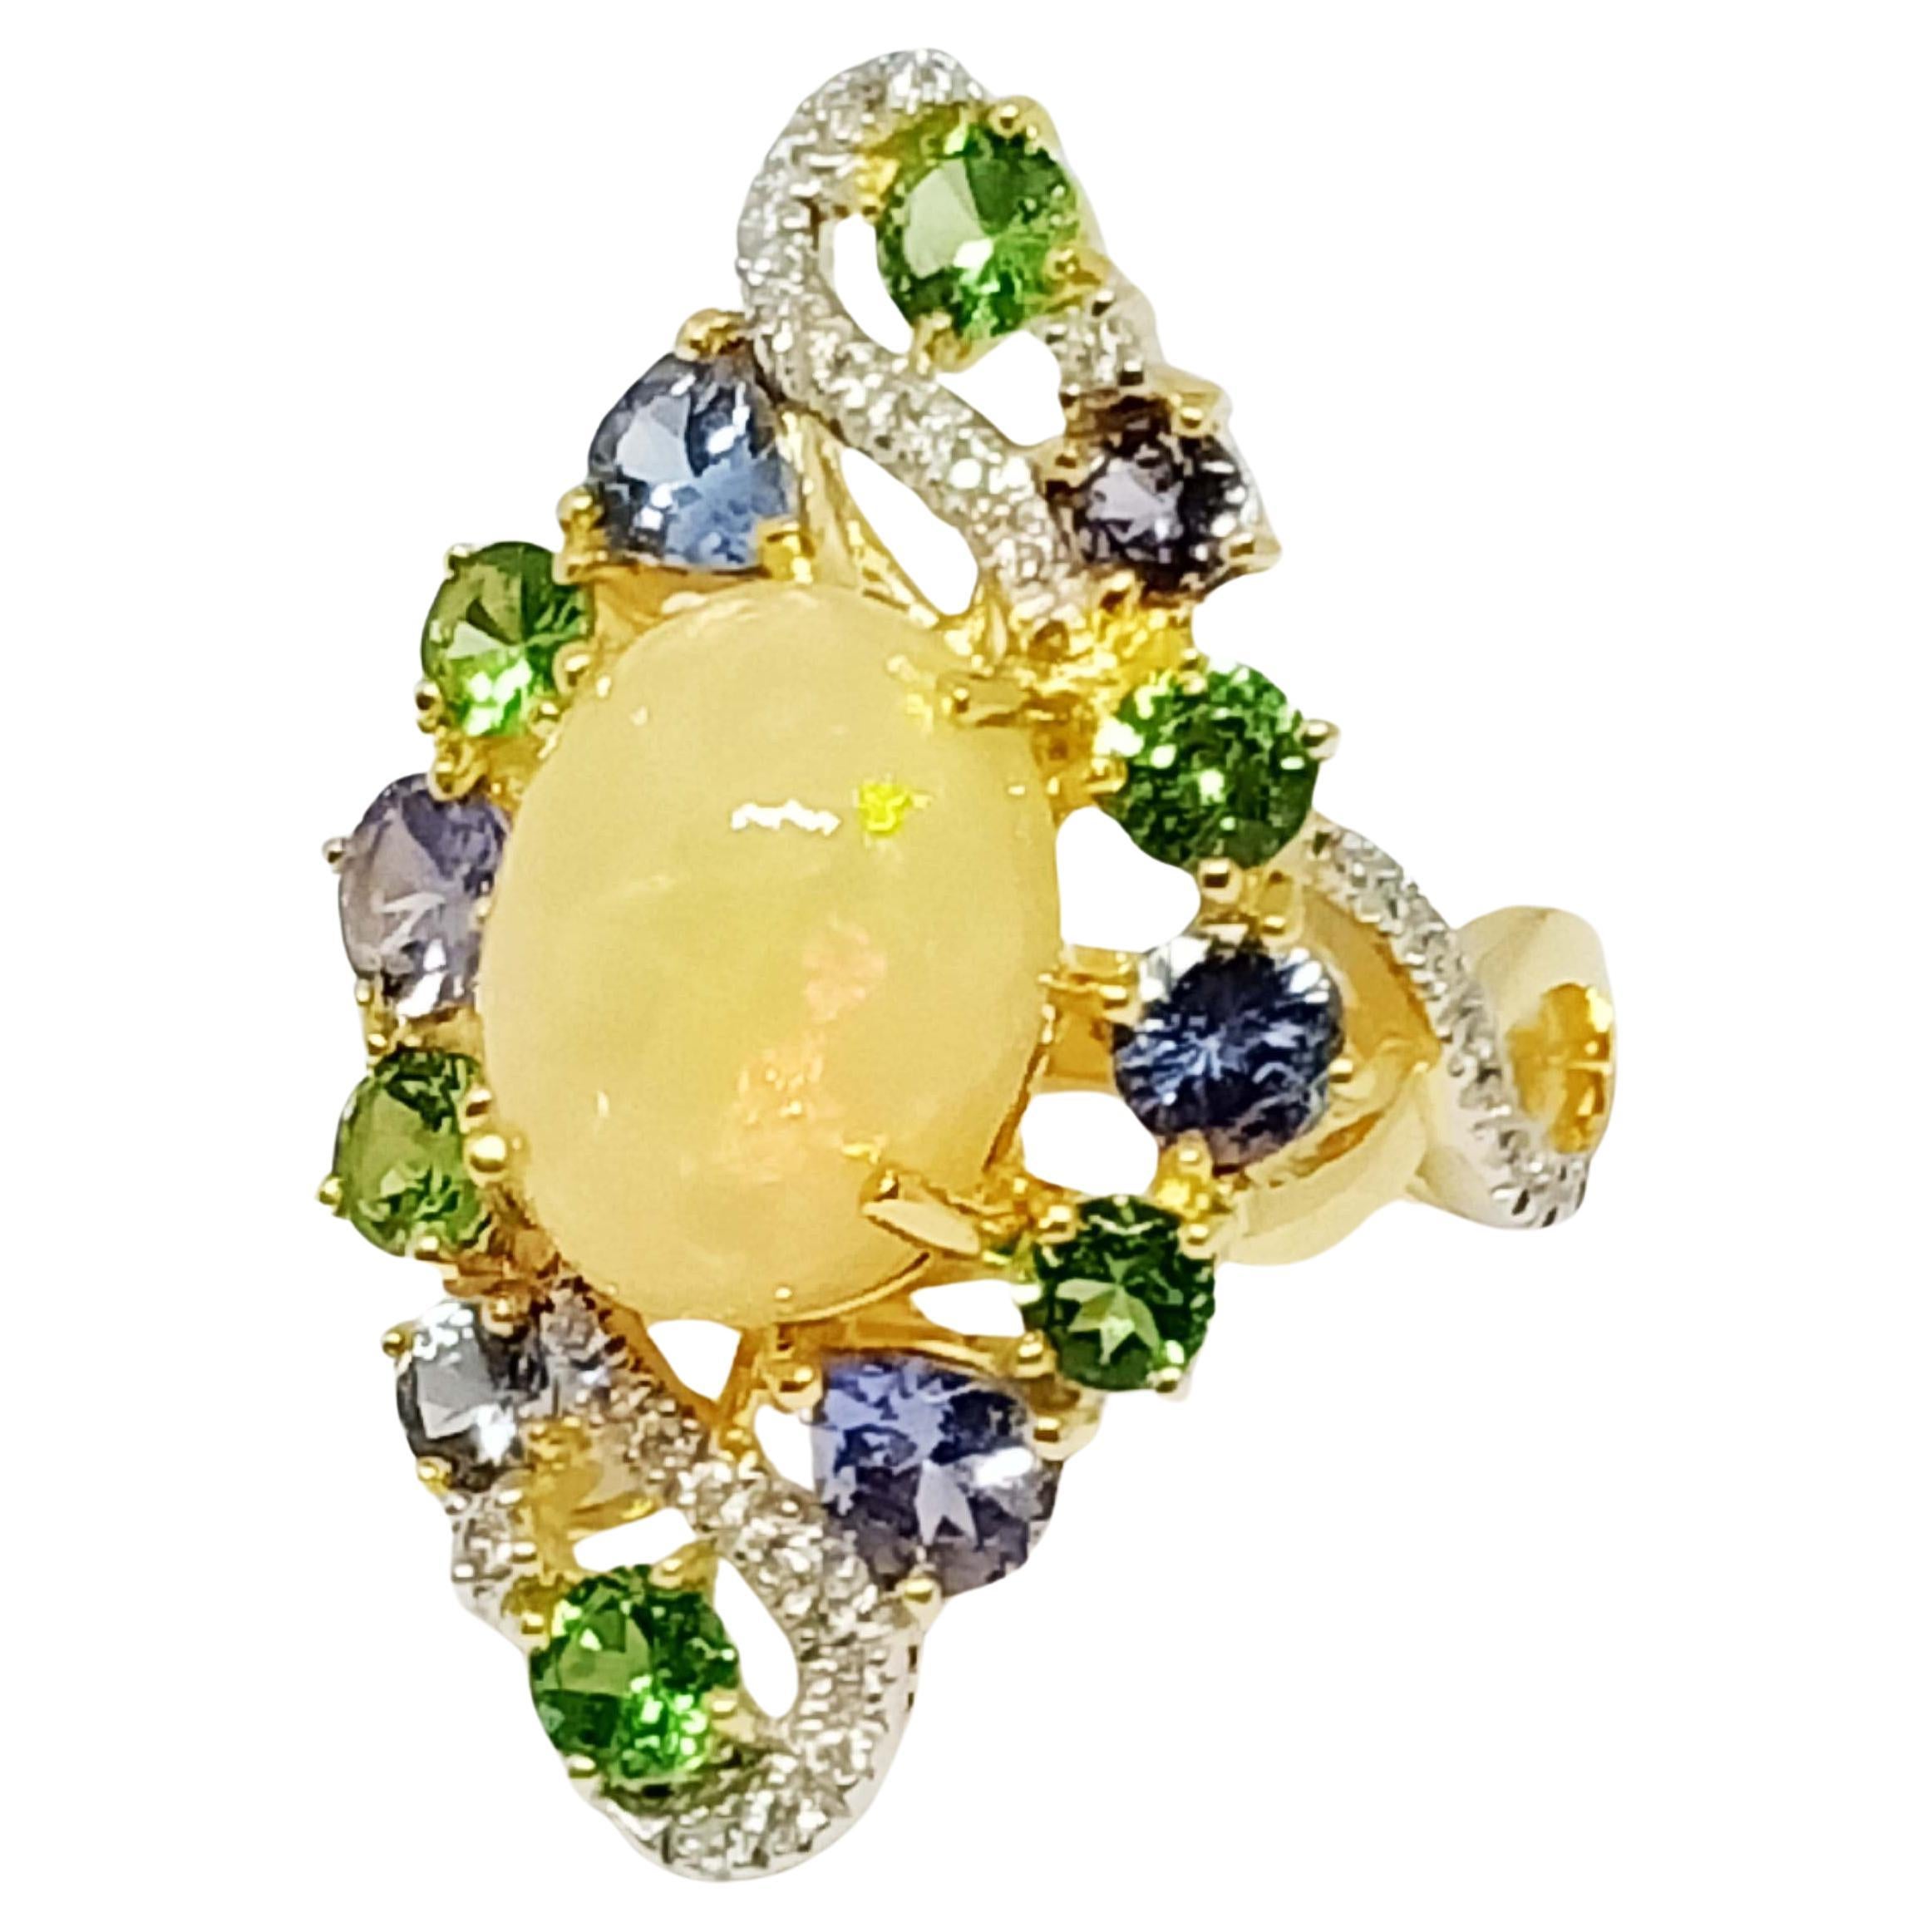 Opal  Oval 12.2x9.2  4.43 cts
Tsavorite round  3.5 , 3.0 mm.   1.18 cts
Tanzanite round 3.0 , 4.0 mm   0.79 cts
Tanzanite Pear 5x4 mm. 0.50 cts.
Diamond round 1.0  , 1.25 mm. 38 pcs. 0.22 cts
Solid Gold 14 K
